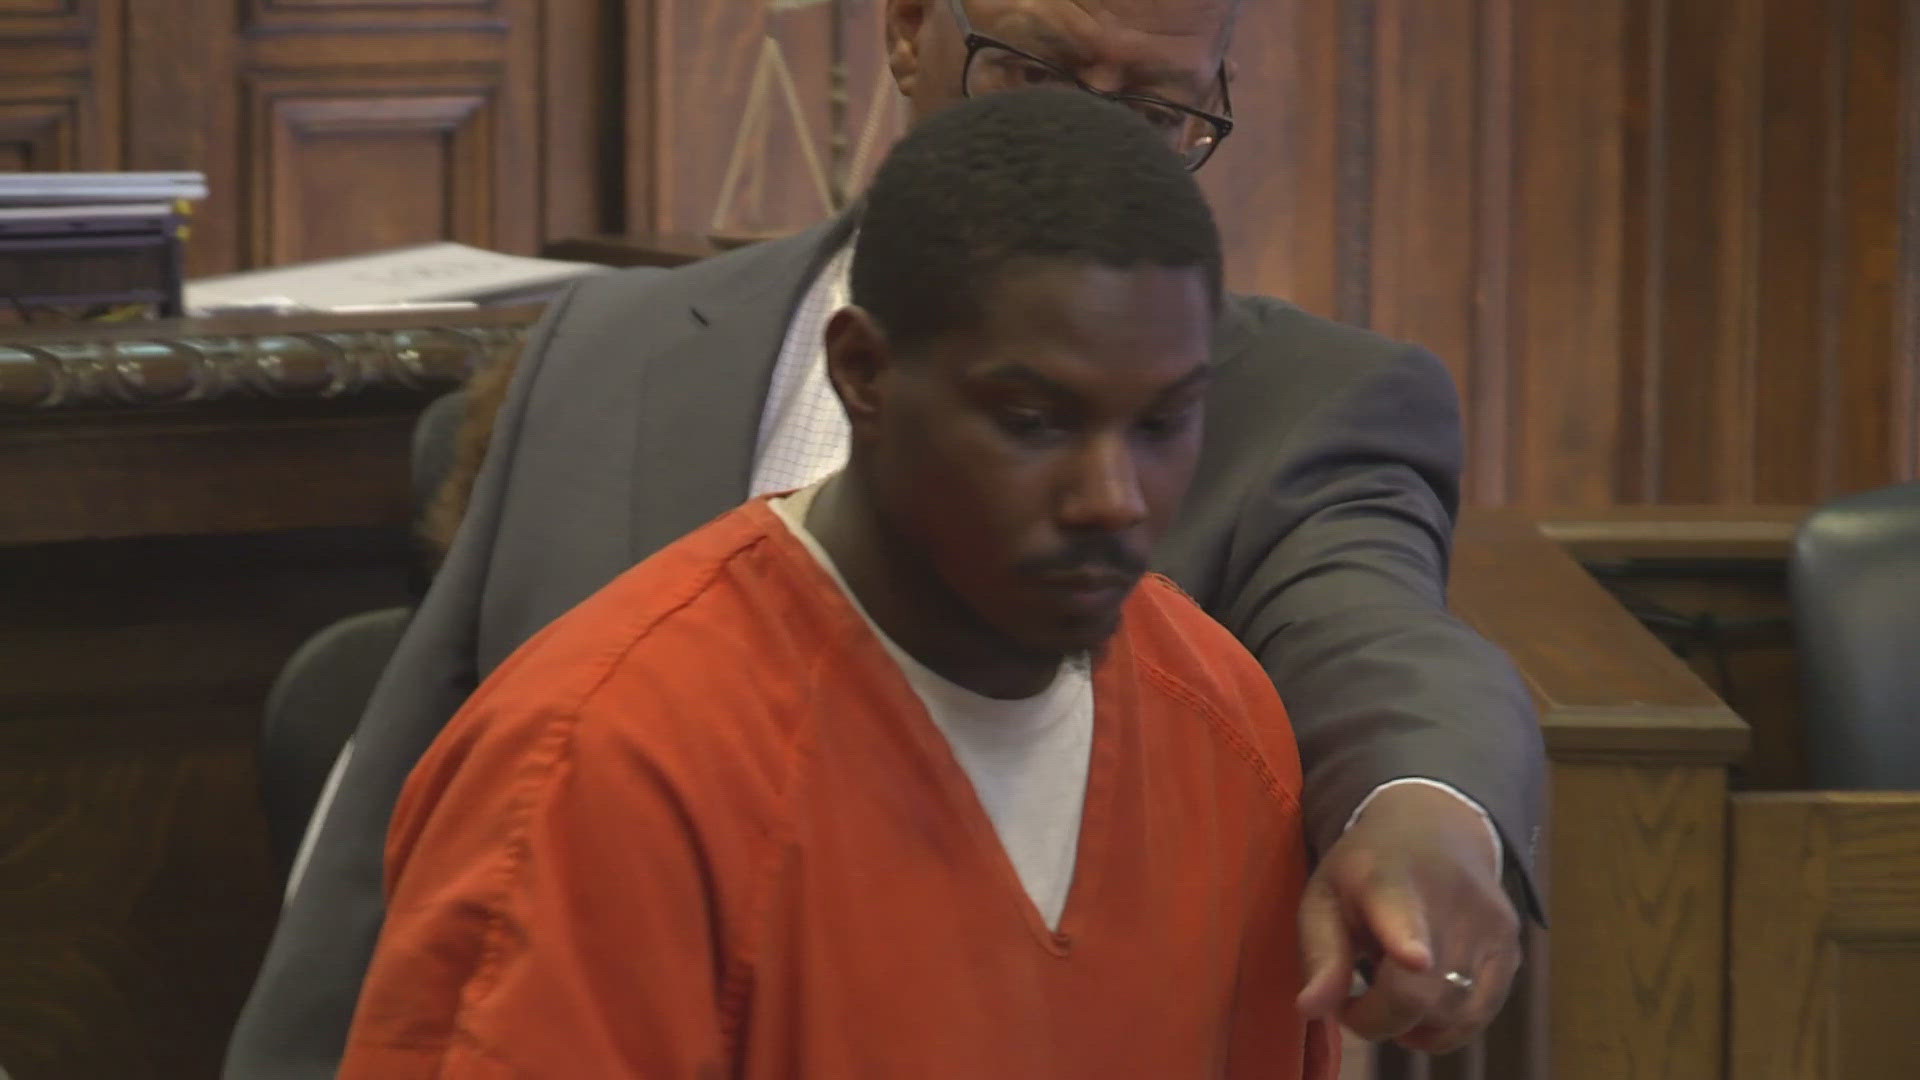 Kahlyl Powe will be eligible for parole after 19 years after pleading guilty to several charges, including murder, in the 2021 death of Kristopher Roukey.